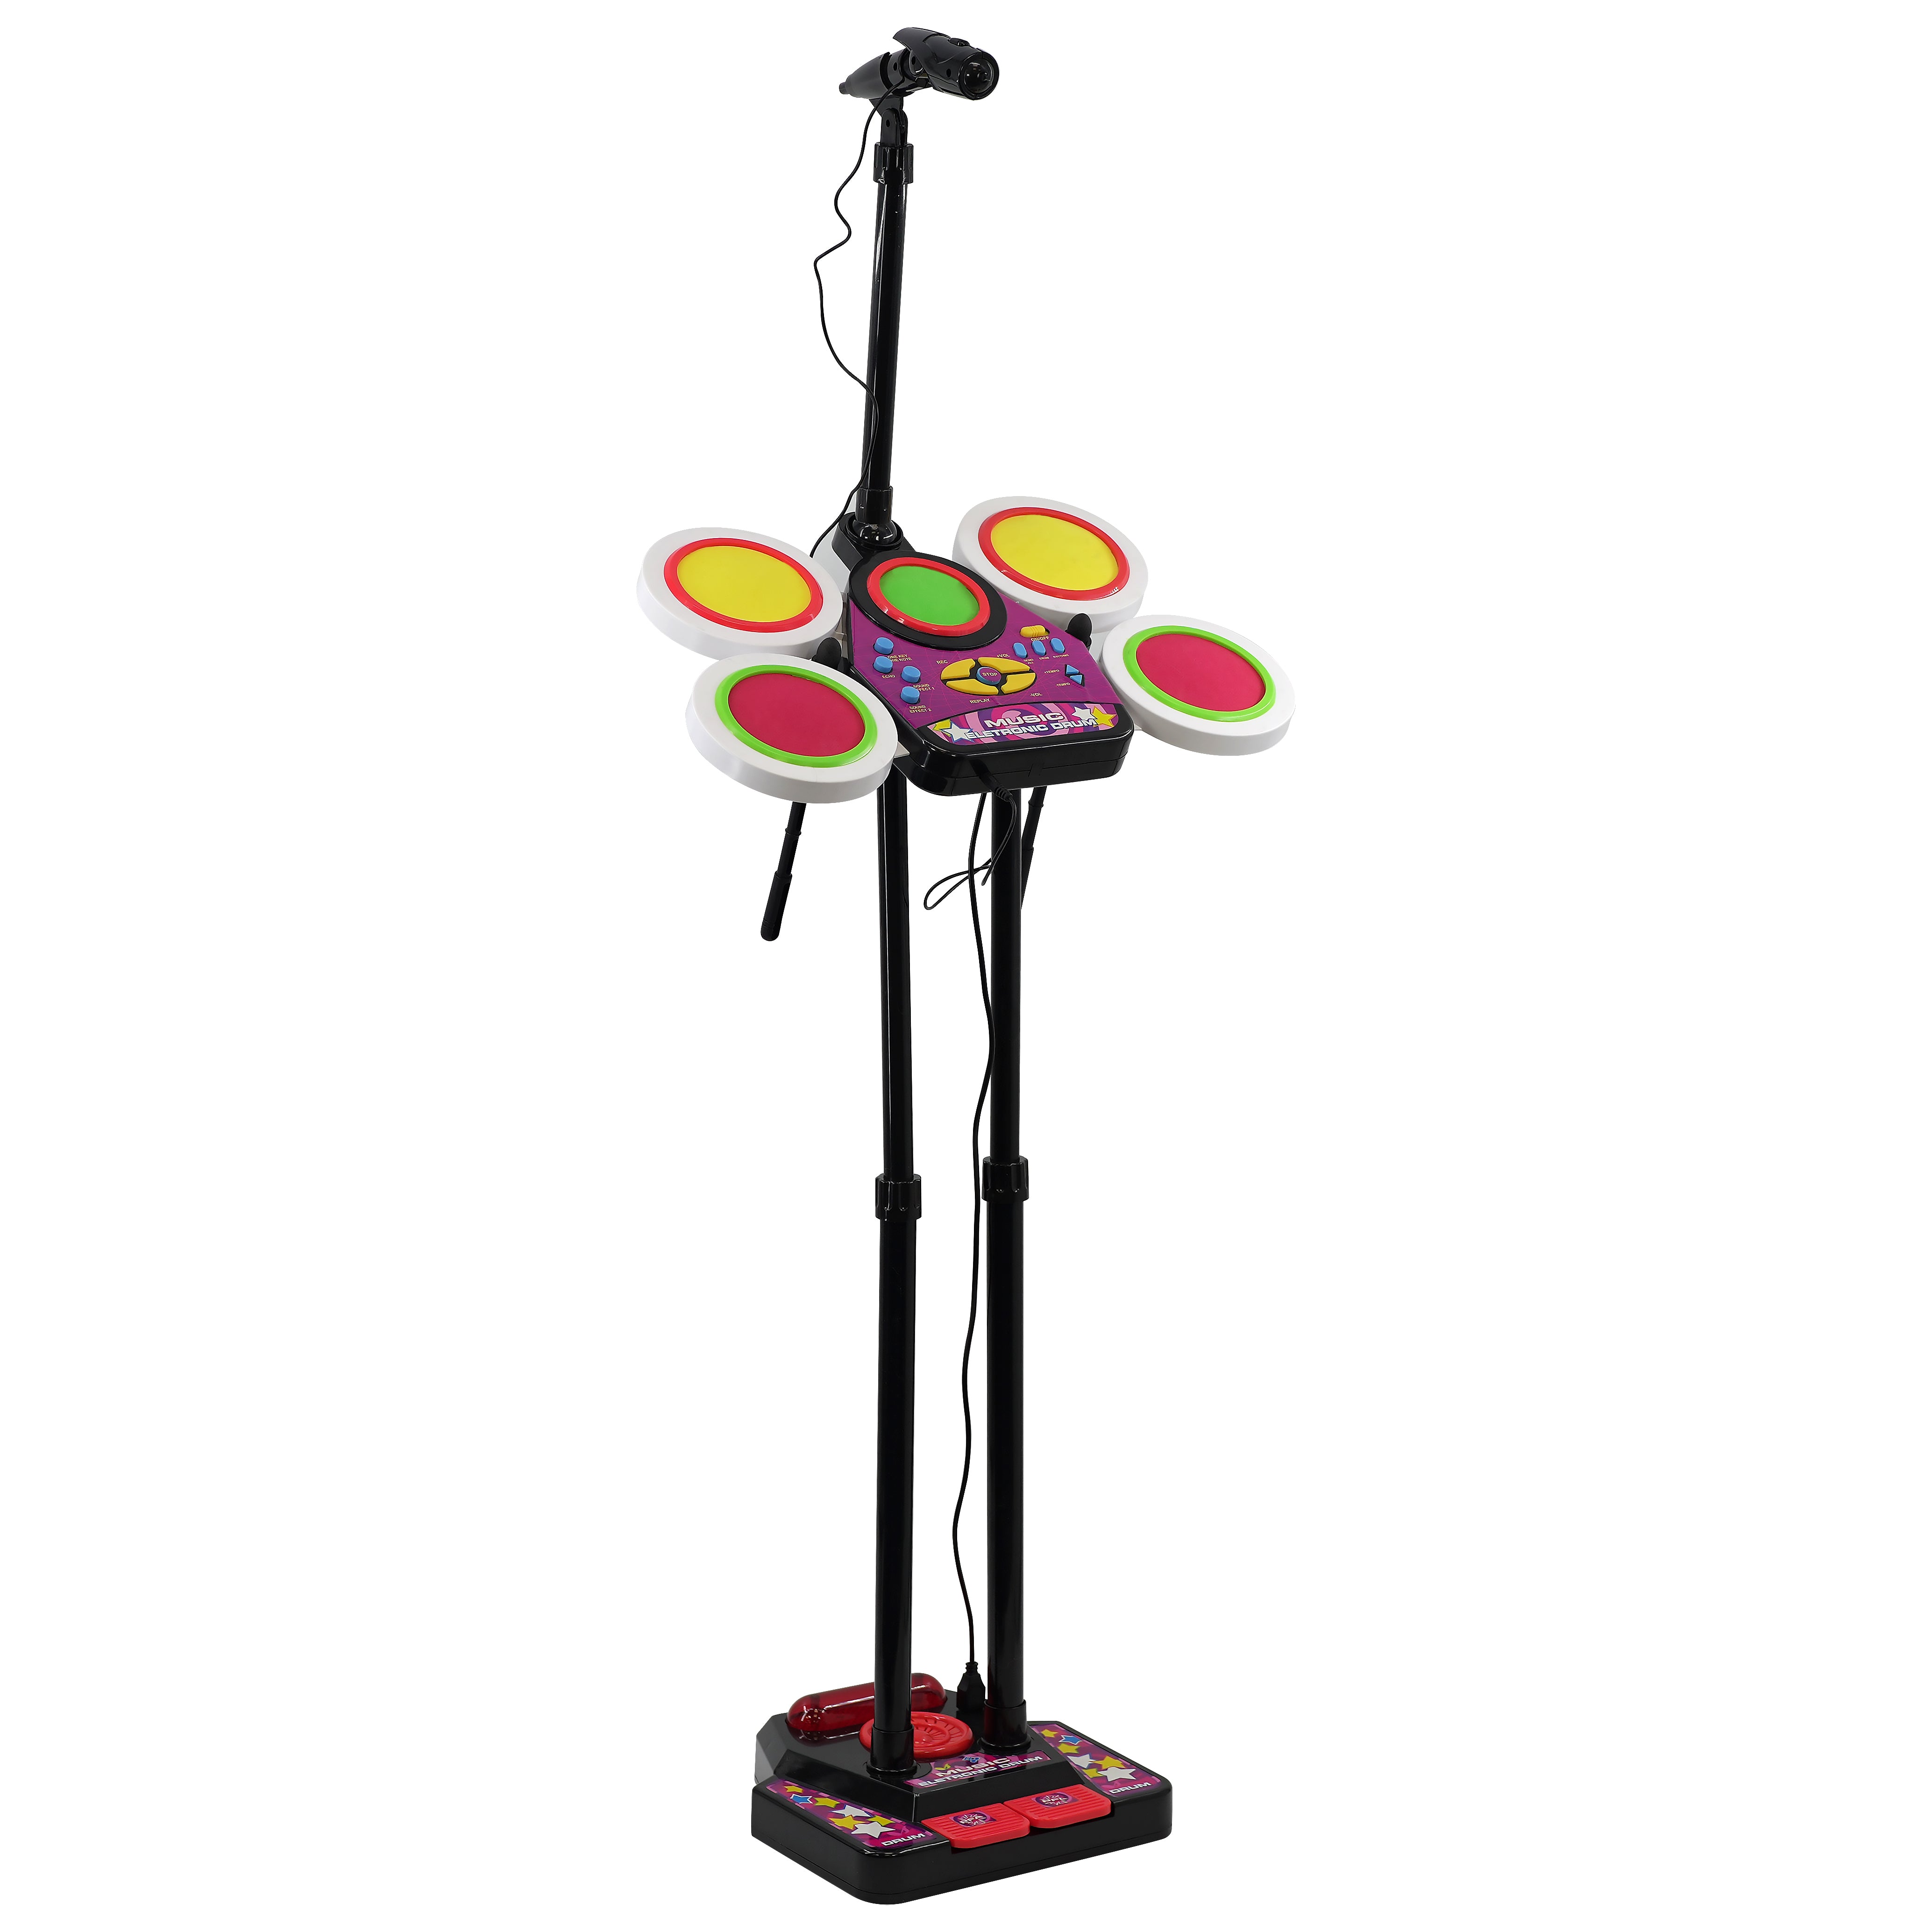 Electronic Drum Kit Playset The Magic Toy Shop - The Magic Toy Shop